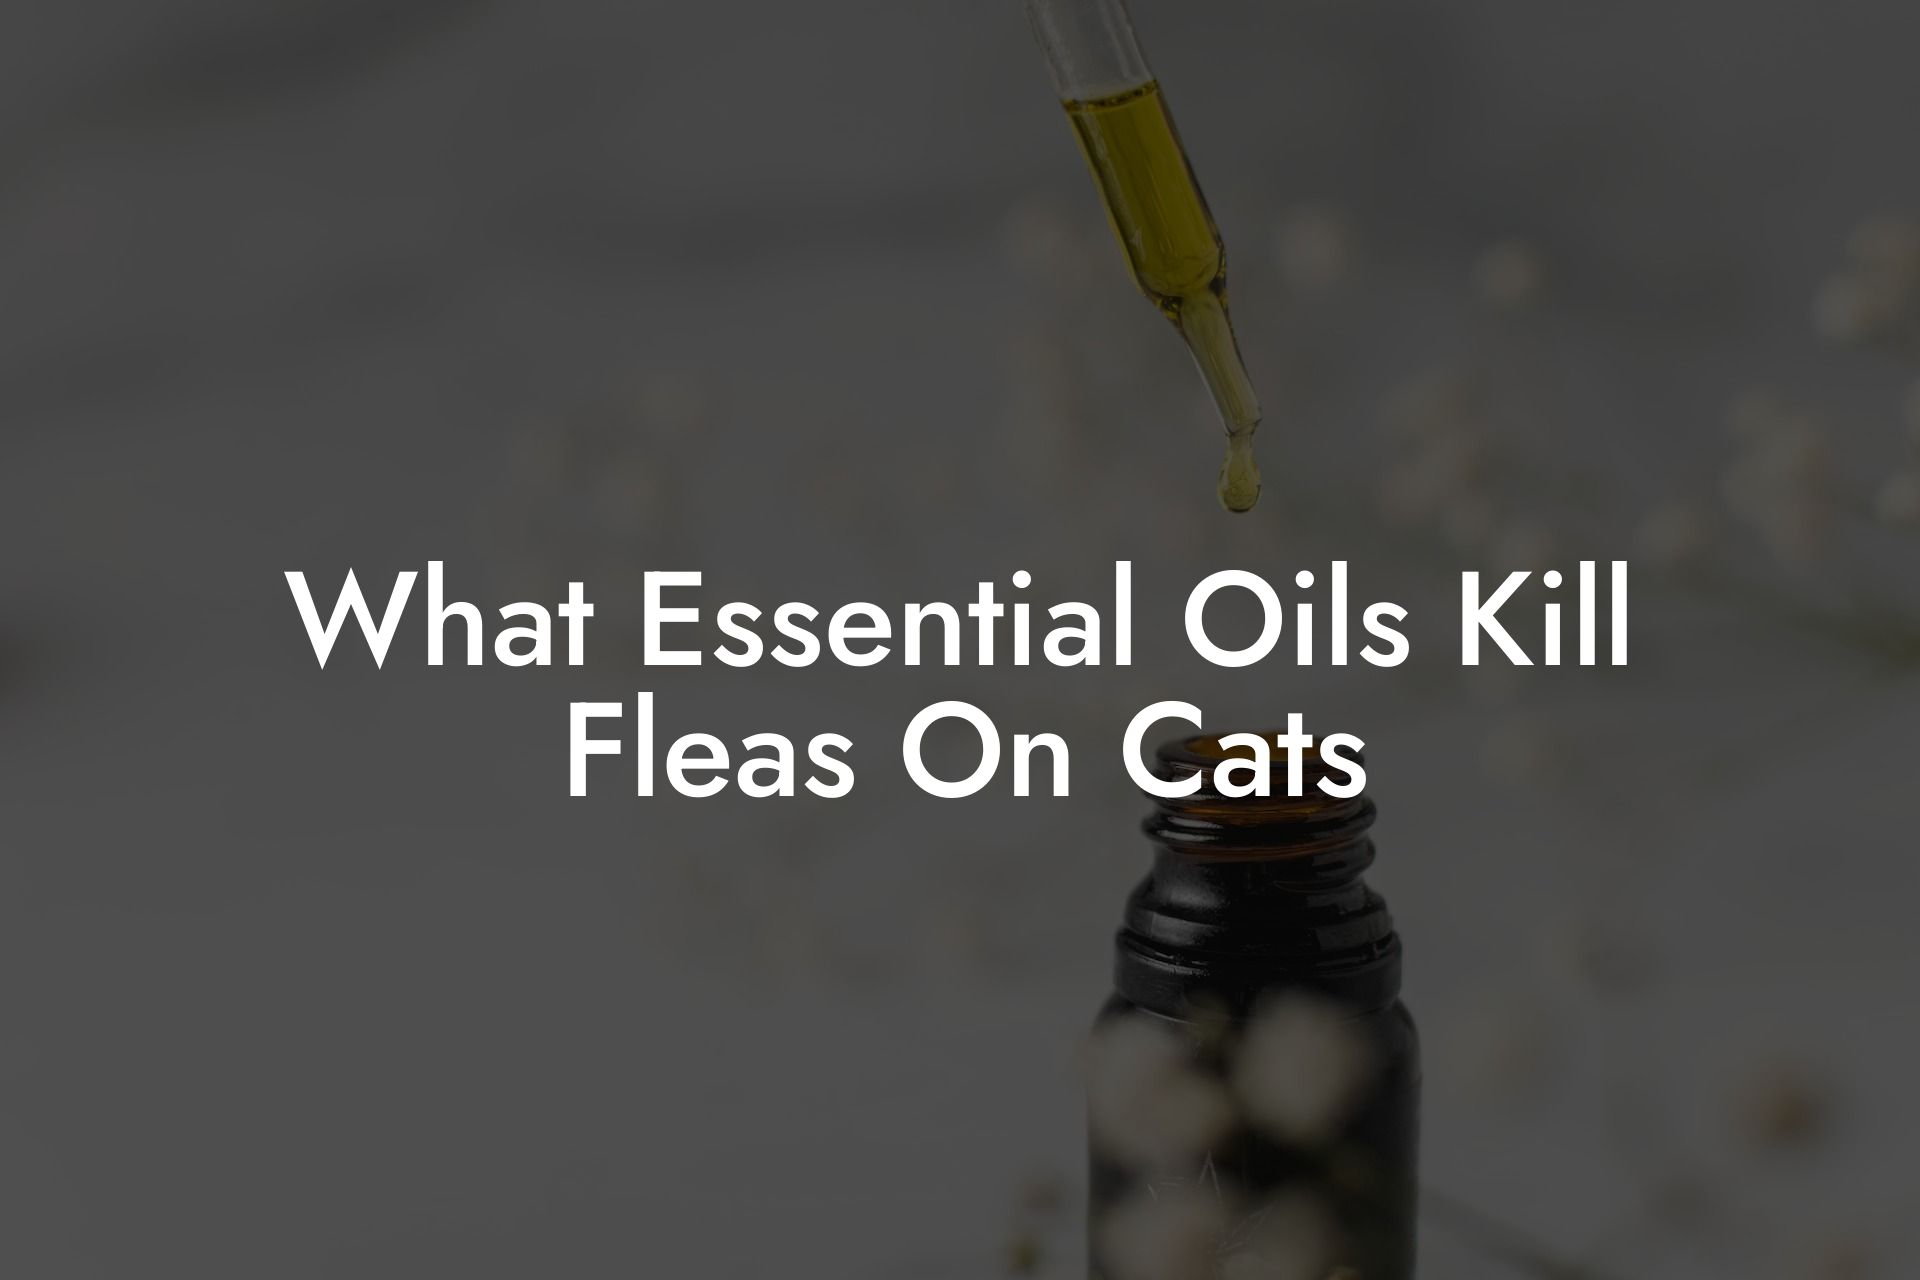 What Essential Oils Kill Fleas On Cats